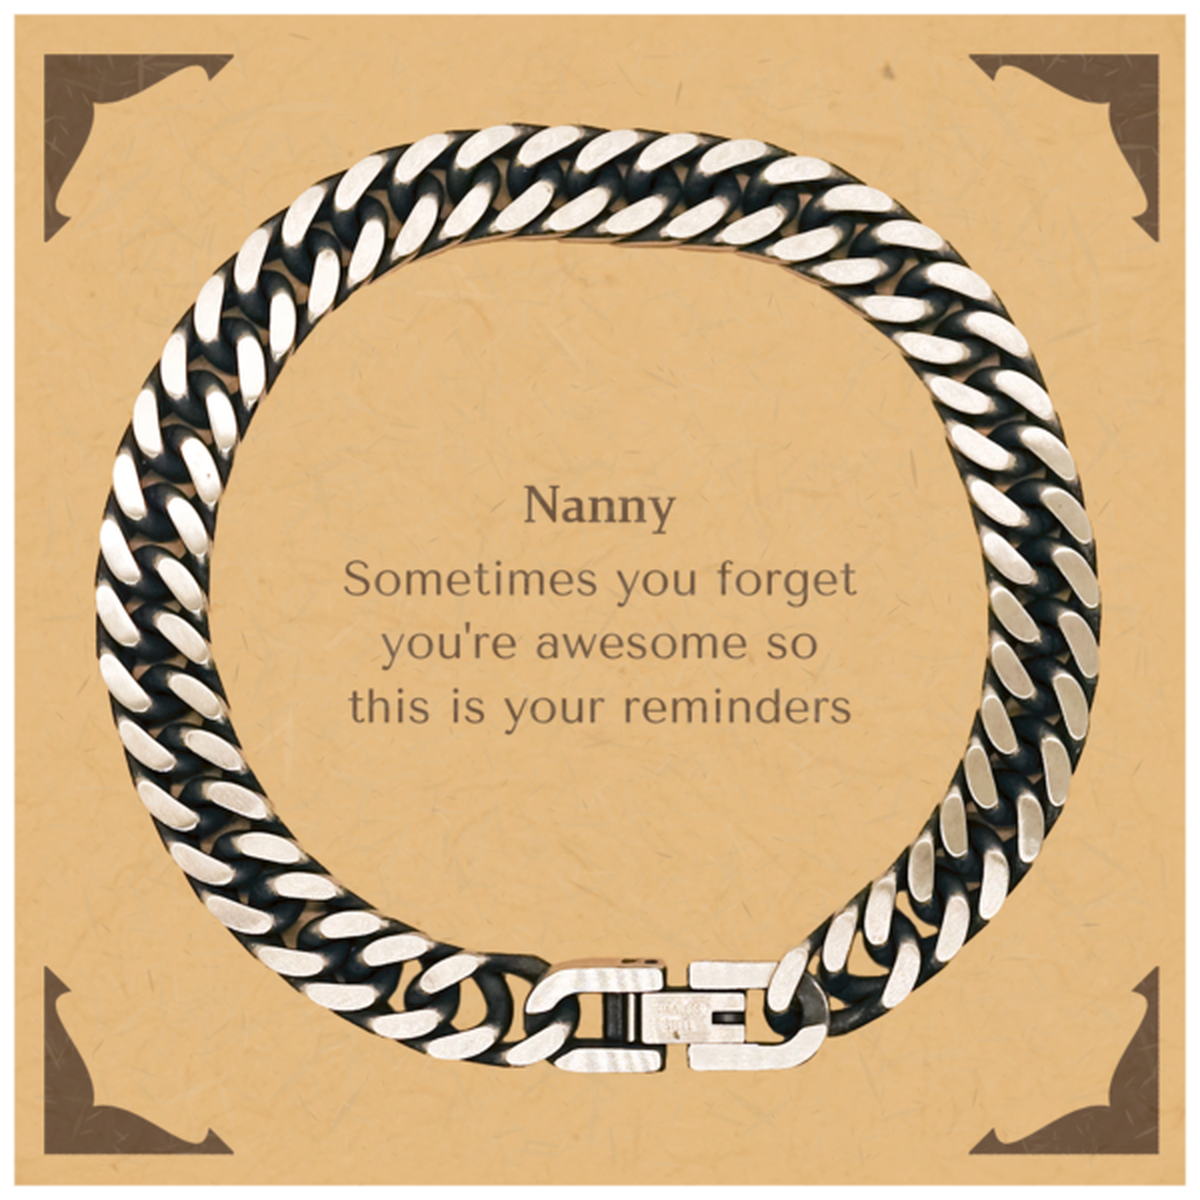 Sentimental Nanny Cuban Link Chain Bracelet, Nanny Sometimes you forget you're awesome so this is your reminders, Graduation Christmas Birthday Gifts for Nanny, Men, Women, Coworkers